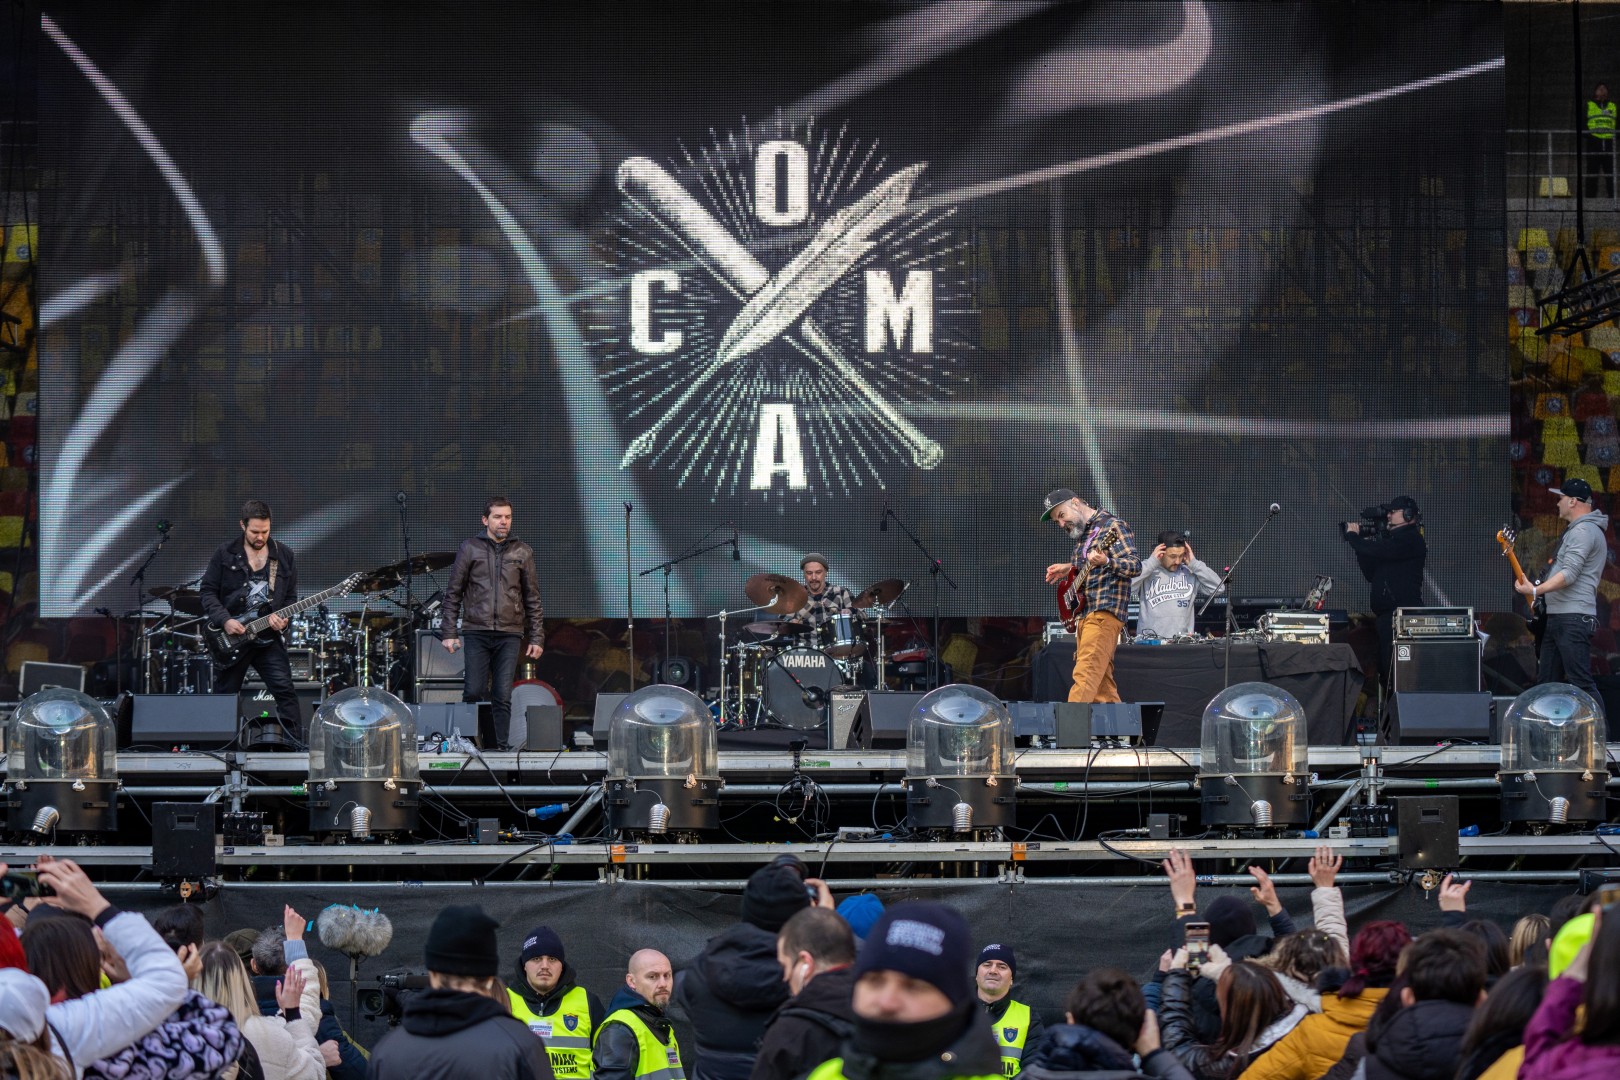 Coma at National Arena in Bucharest on March 12, 2022 (8e65bb291b)